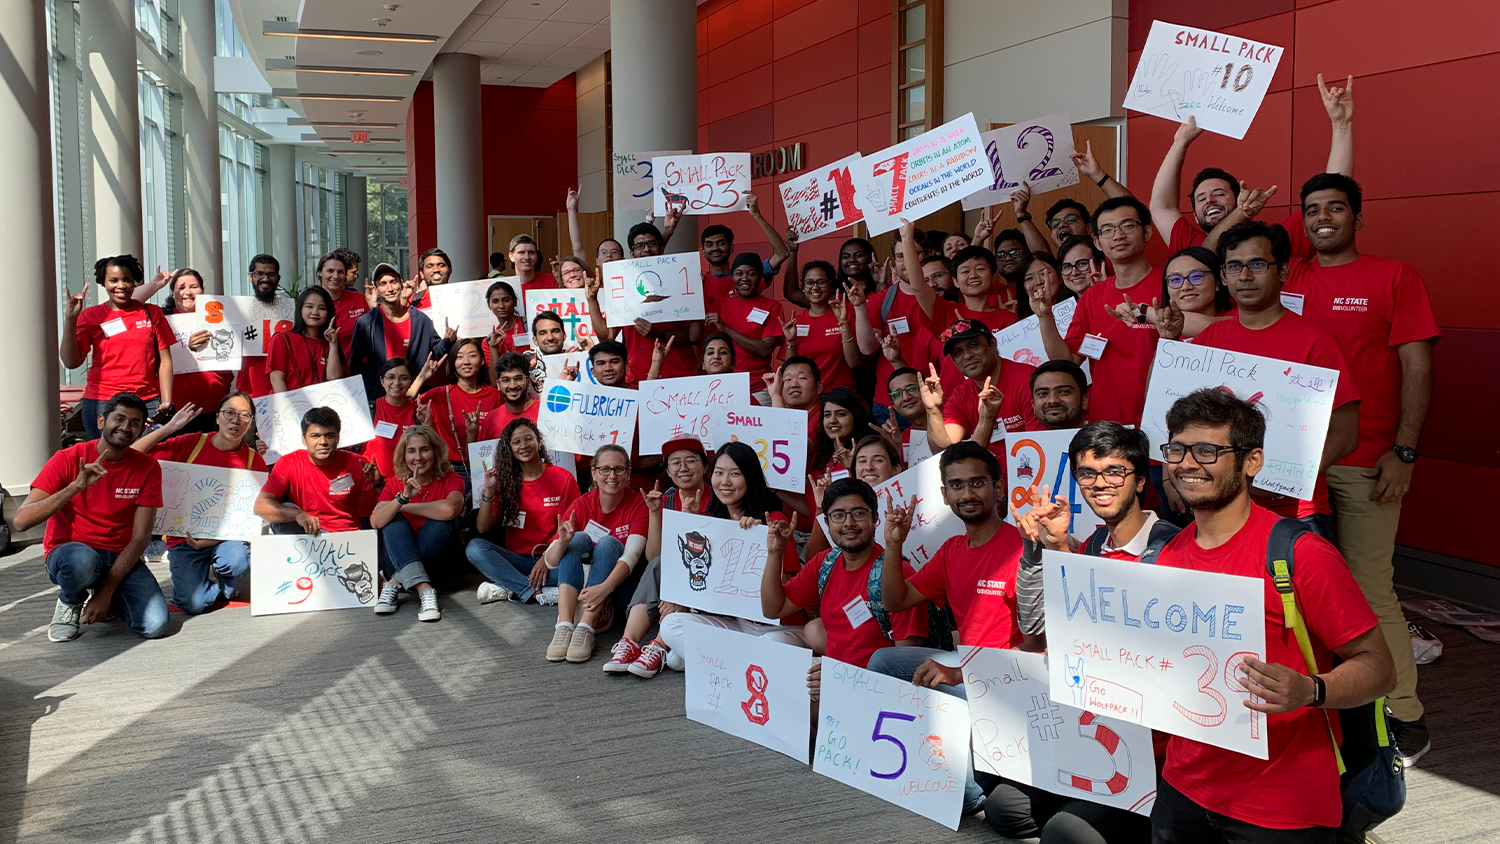 A group of international students volunteering as Small Pack Leaders are posing for a photo while holding up their group signs.